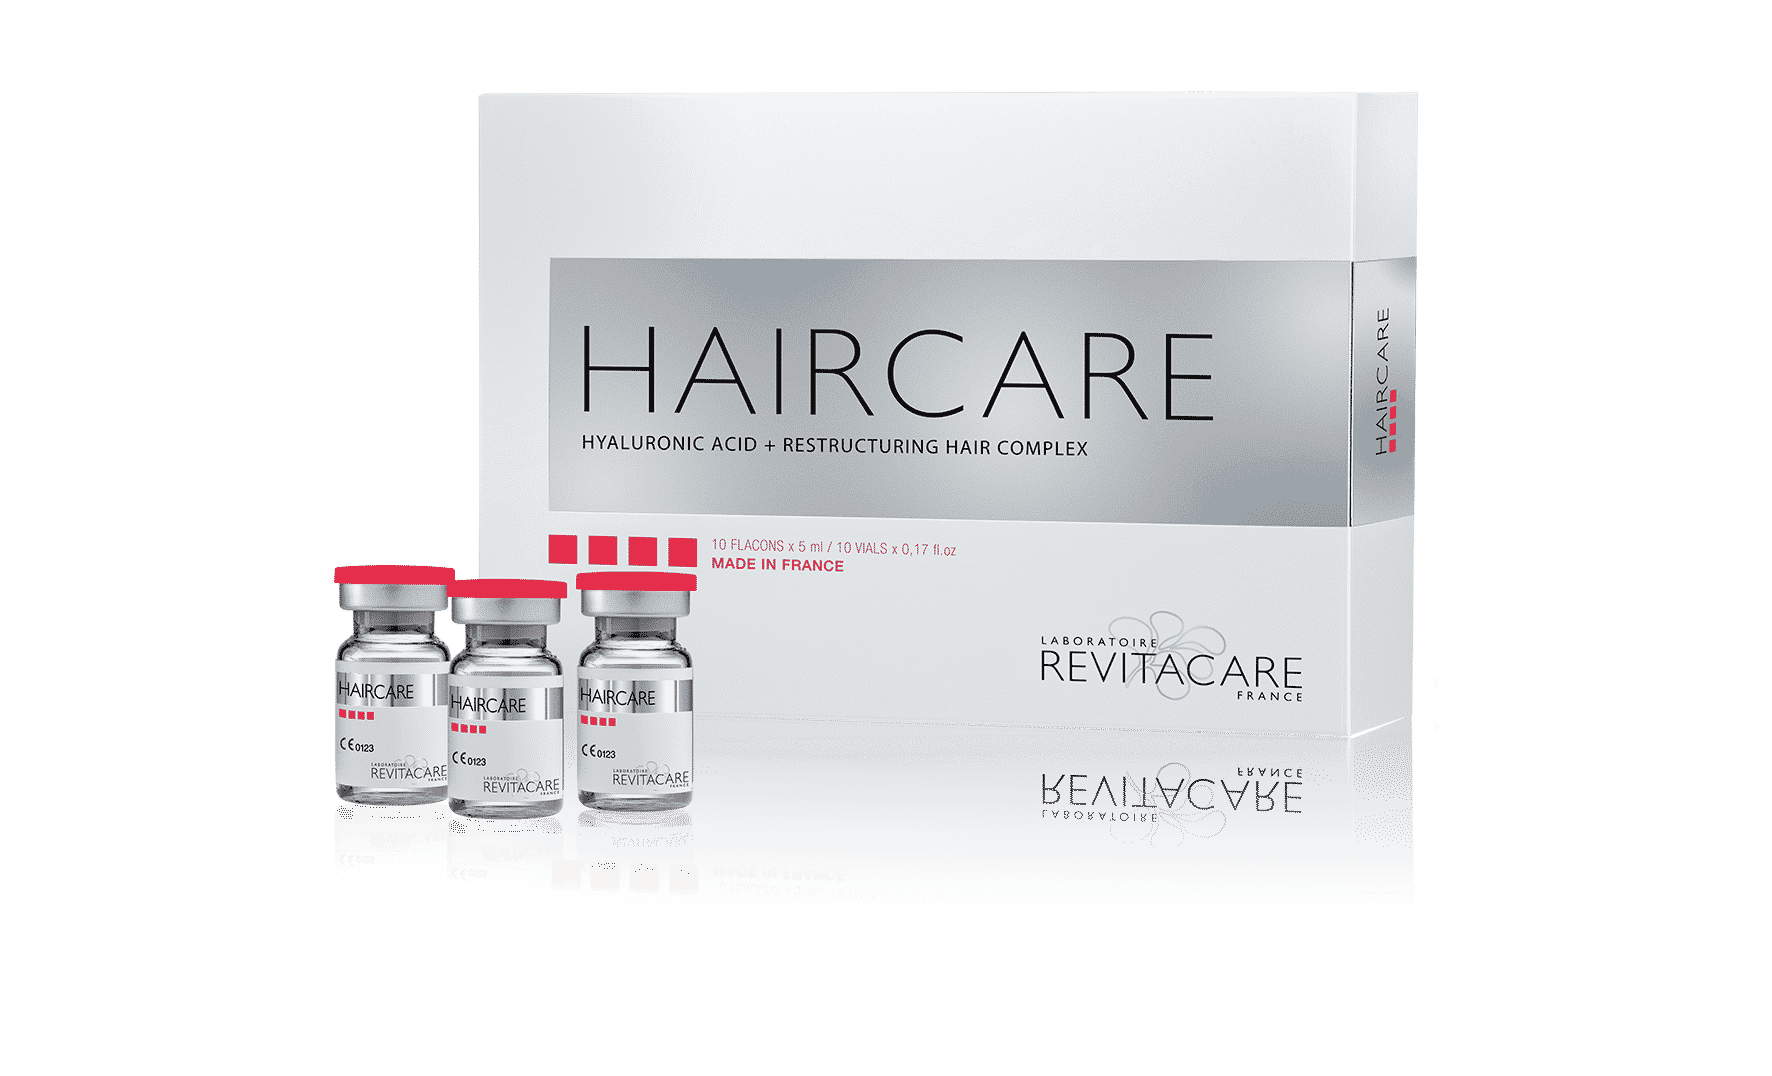 HAIRCARE Hyaluronic acid + restructuring hair complex